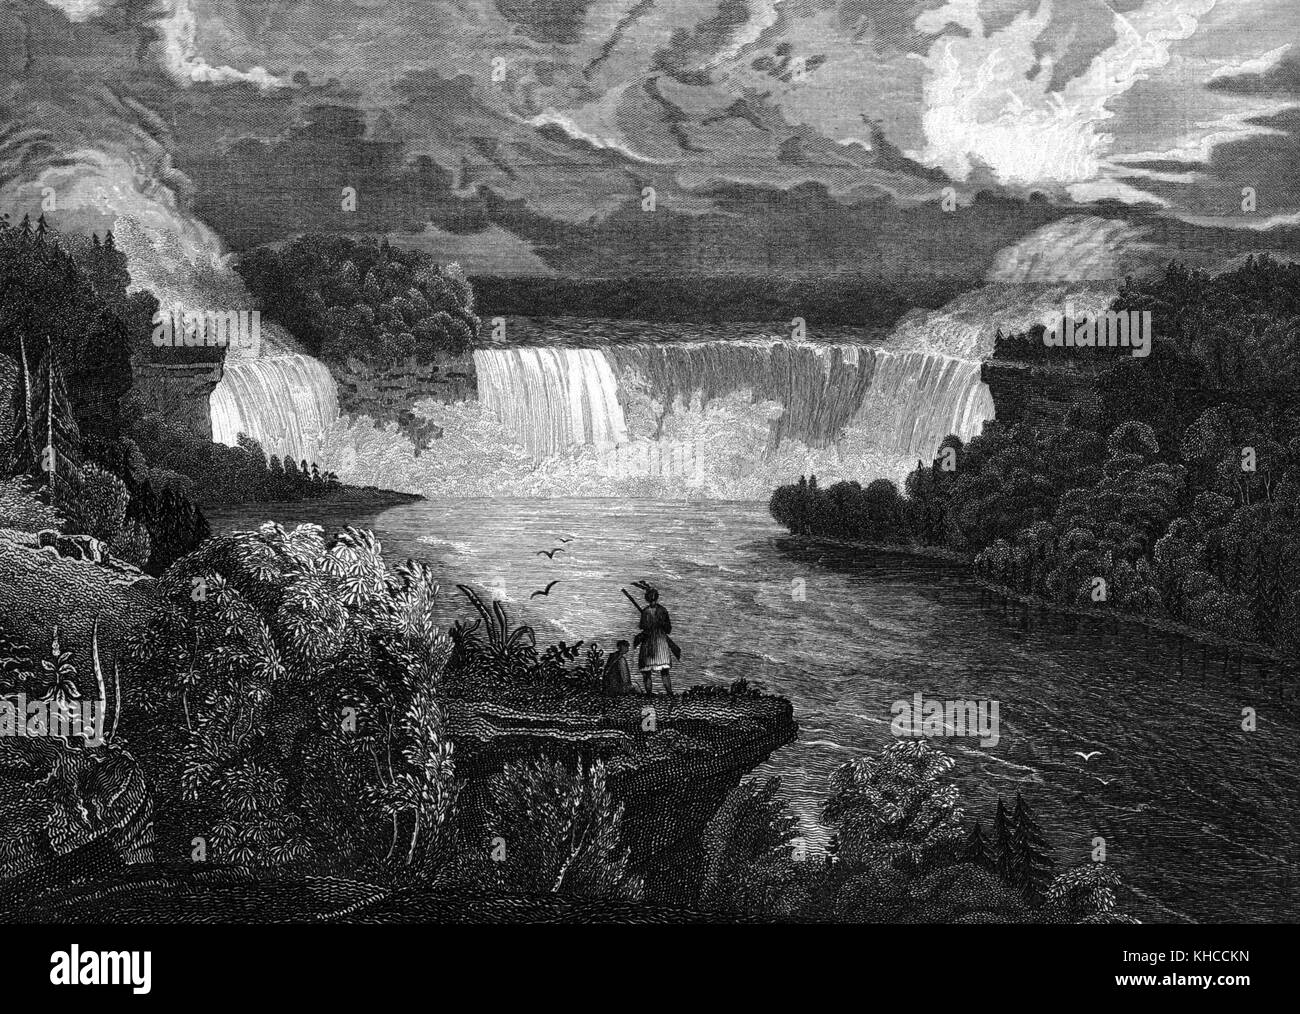 An engraving from a painting of Niagara Falls from the New York side, a Native American is depicted standing on an outcropping over the river holding a rifle, the landscape of the painting consists of forests and flowing water, New York, 1826. From the New York Public Library. Stock Photo